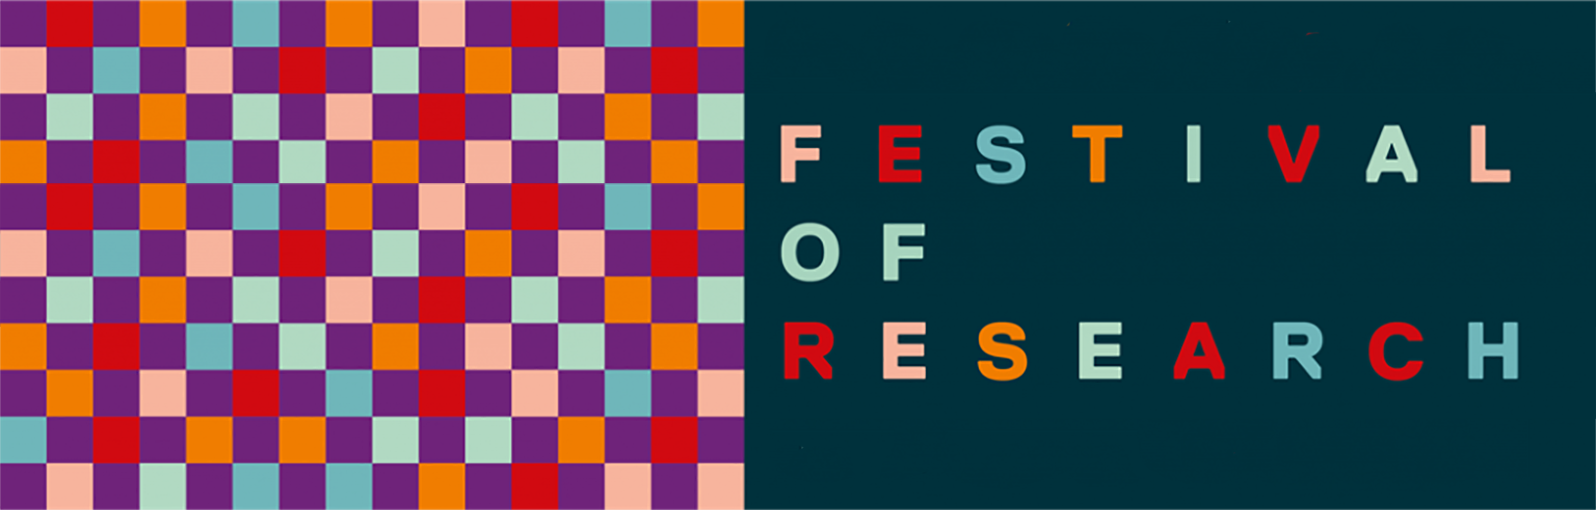 Festival of Research banner 